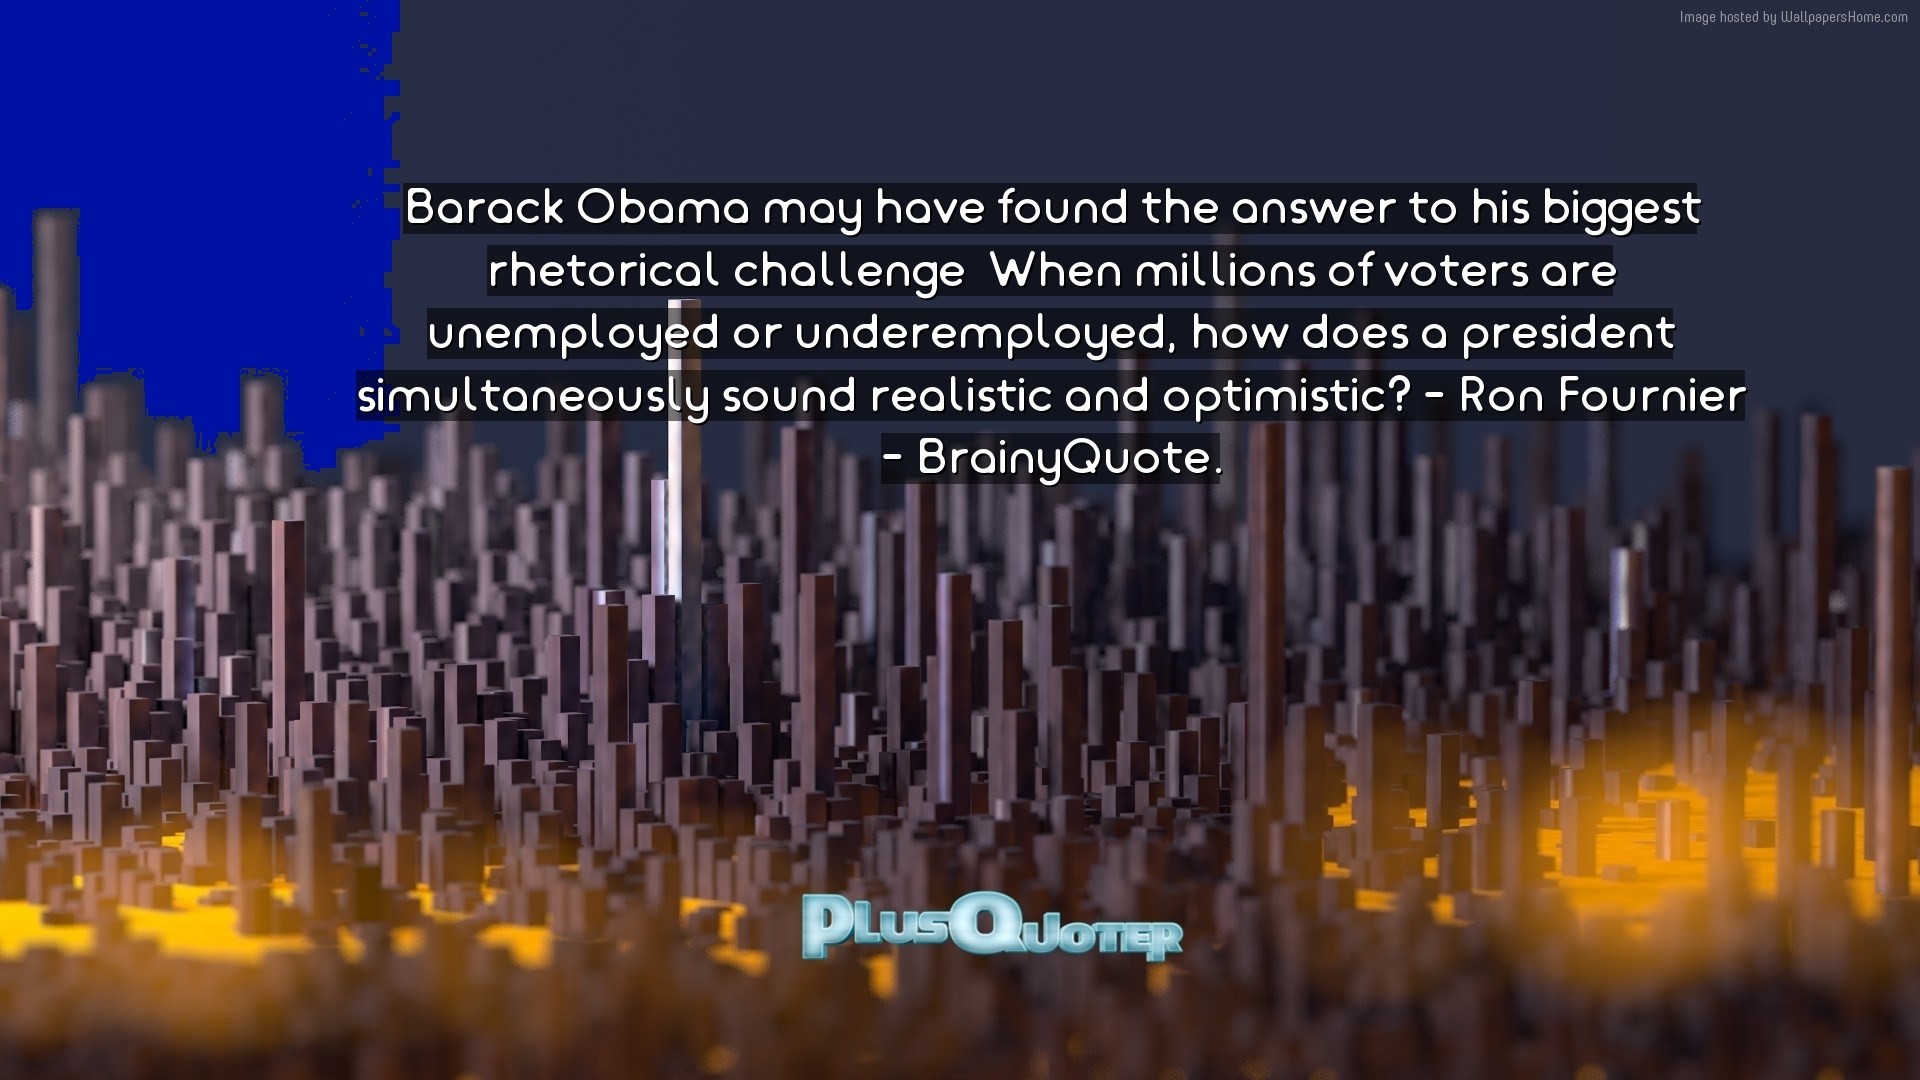 1920x1080 Download Wallpaper with inspirational Quotes- "Barack Obama may have found  the answer to his